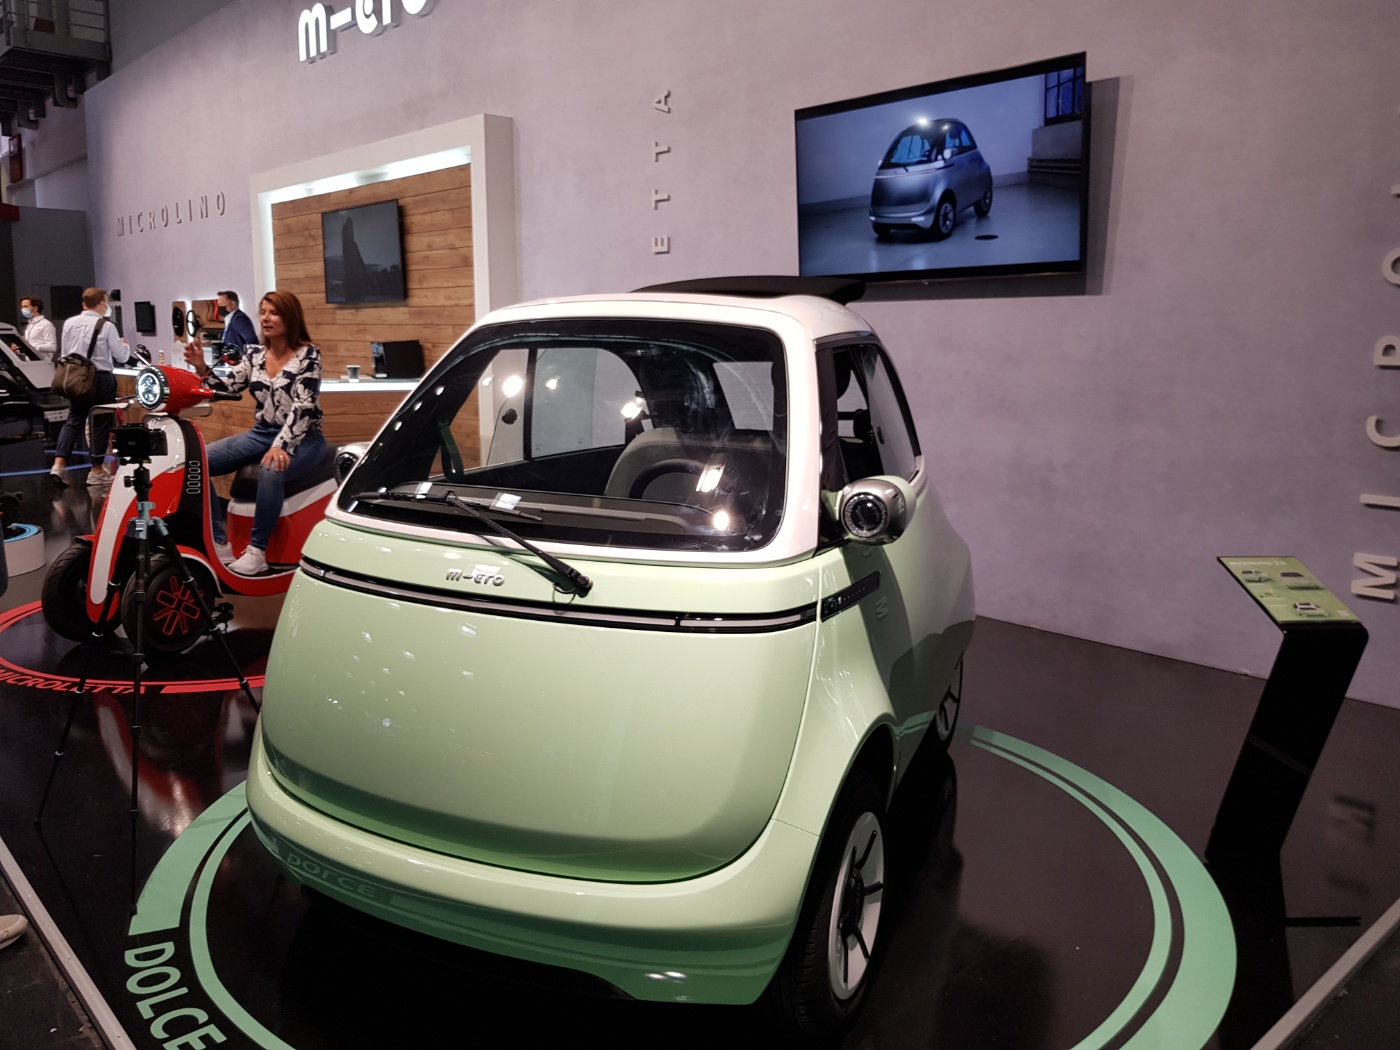 Another real eye-catcher at the IAA MOBILITY 2021 was the Microlino 2.0, which is reminiscent of BMW's Isetta scooter from the 1950s. Designed for two people, the 90 km/h microcar offers an amazingly good sense of space for two people and is said to have a range of up to 230 kilometres. This is what makes microcars fun, according to the feedback of many stand visitors.